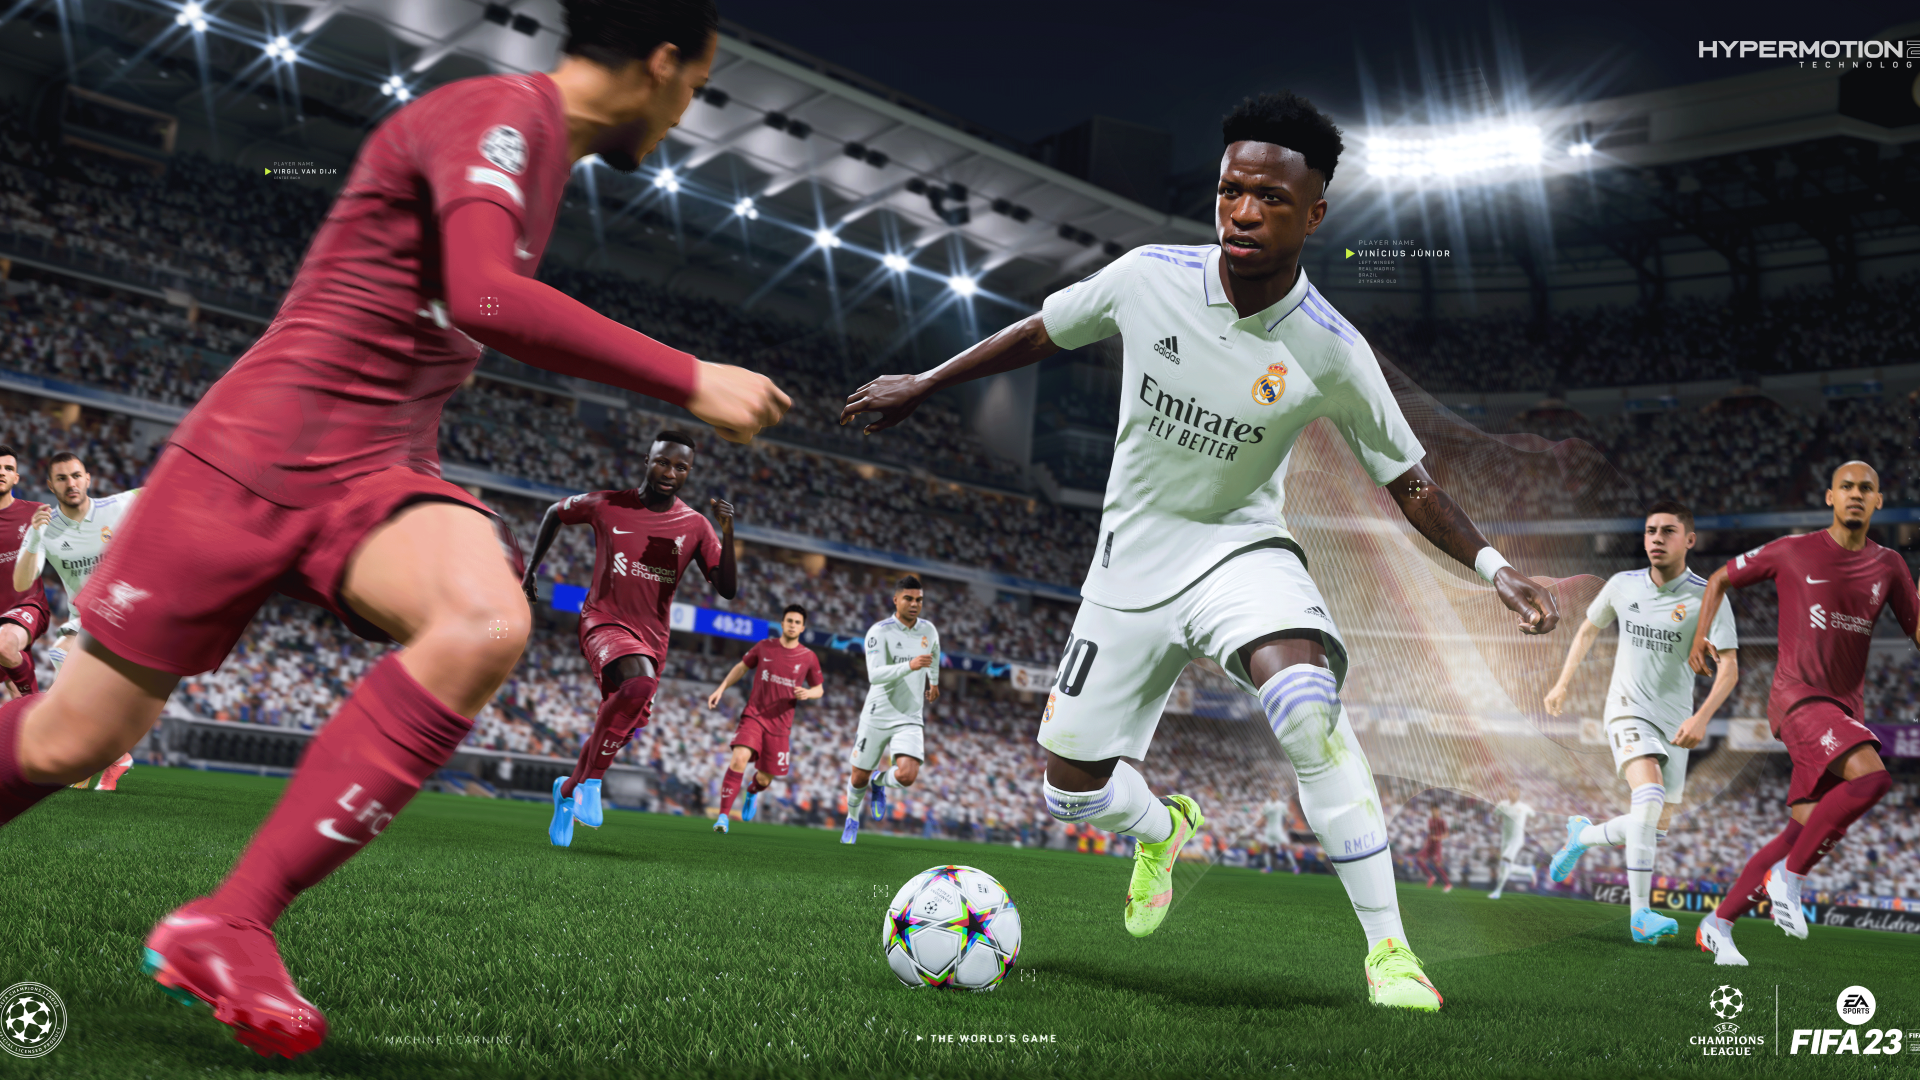 FIFA 23: Release Date, Price, Pre Orders, And More